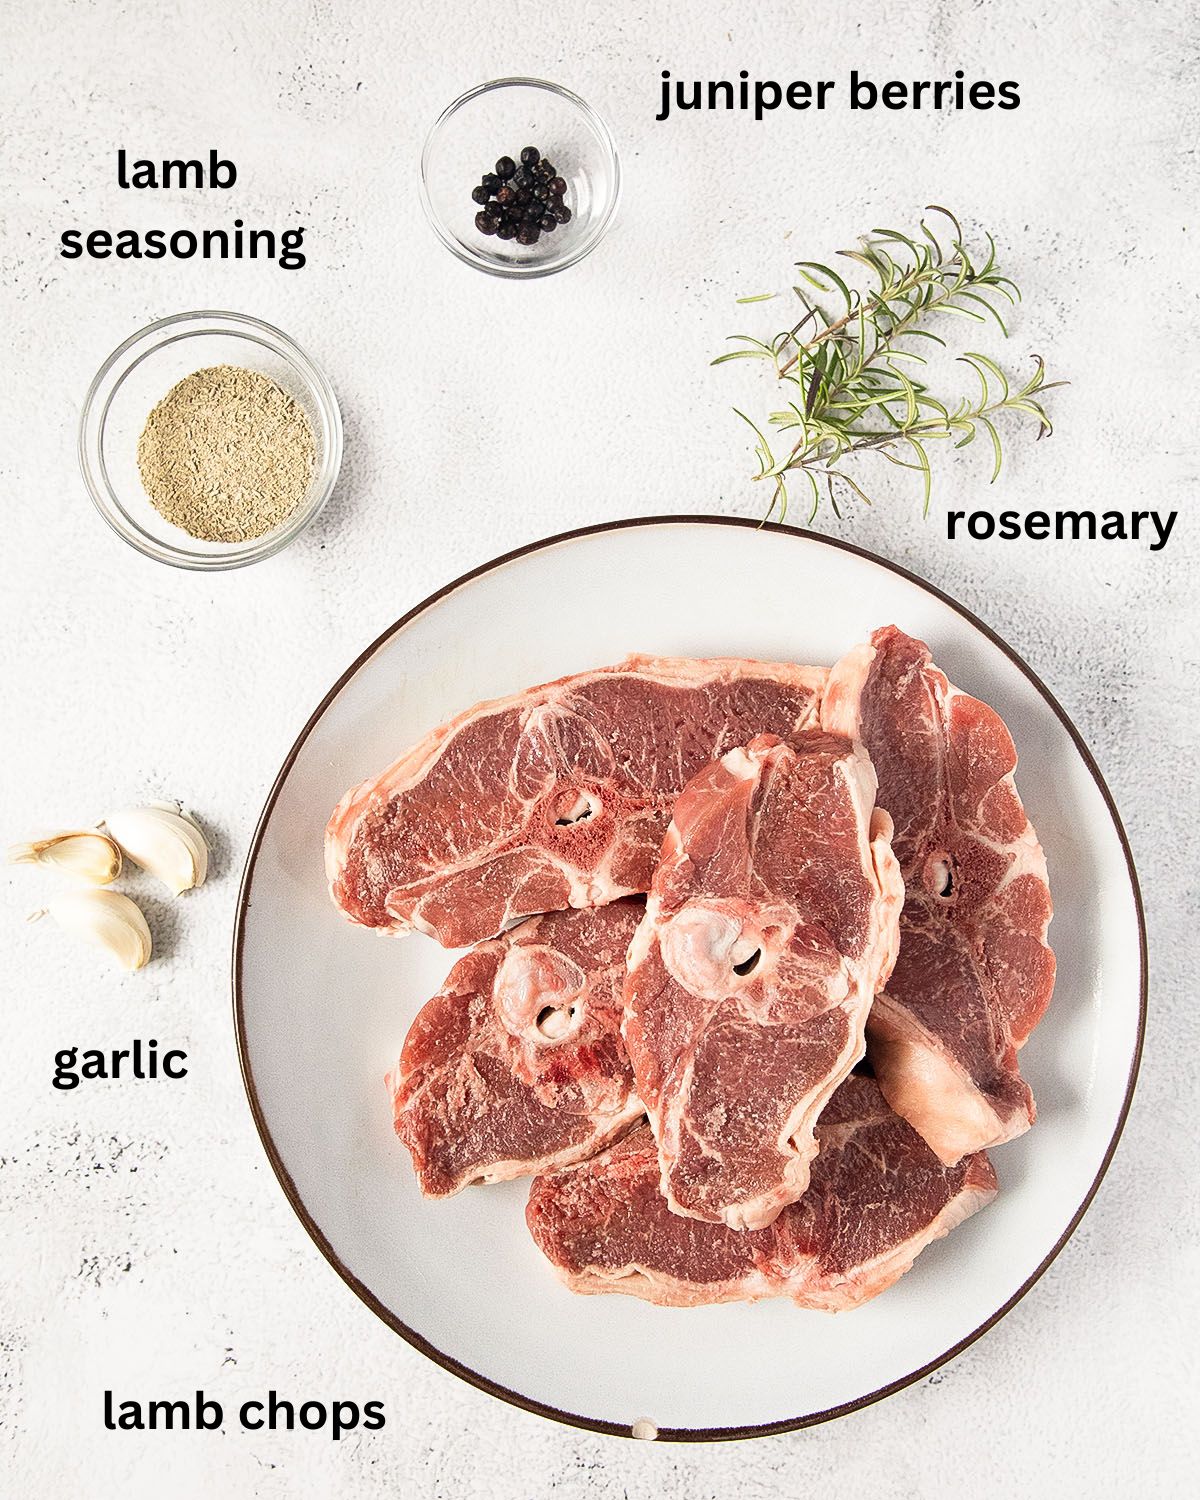 labeled ingredients for cooking lamb chops with rosemary and garlic.